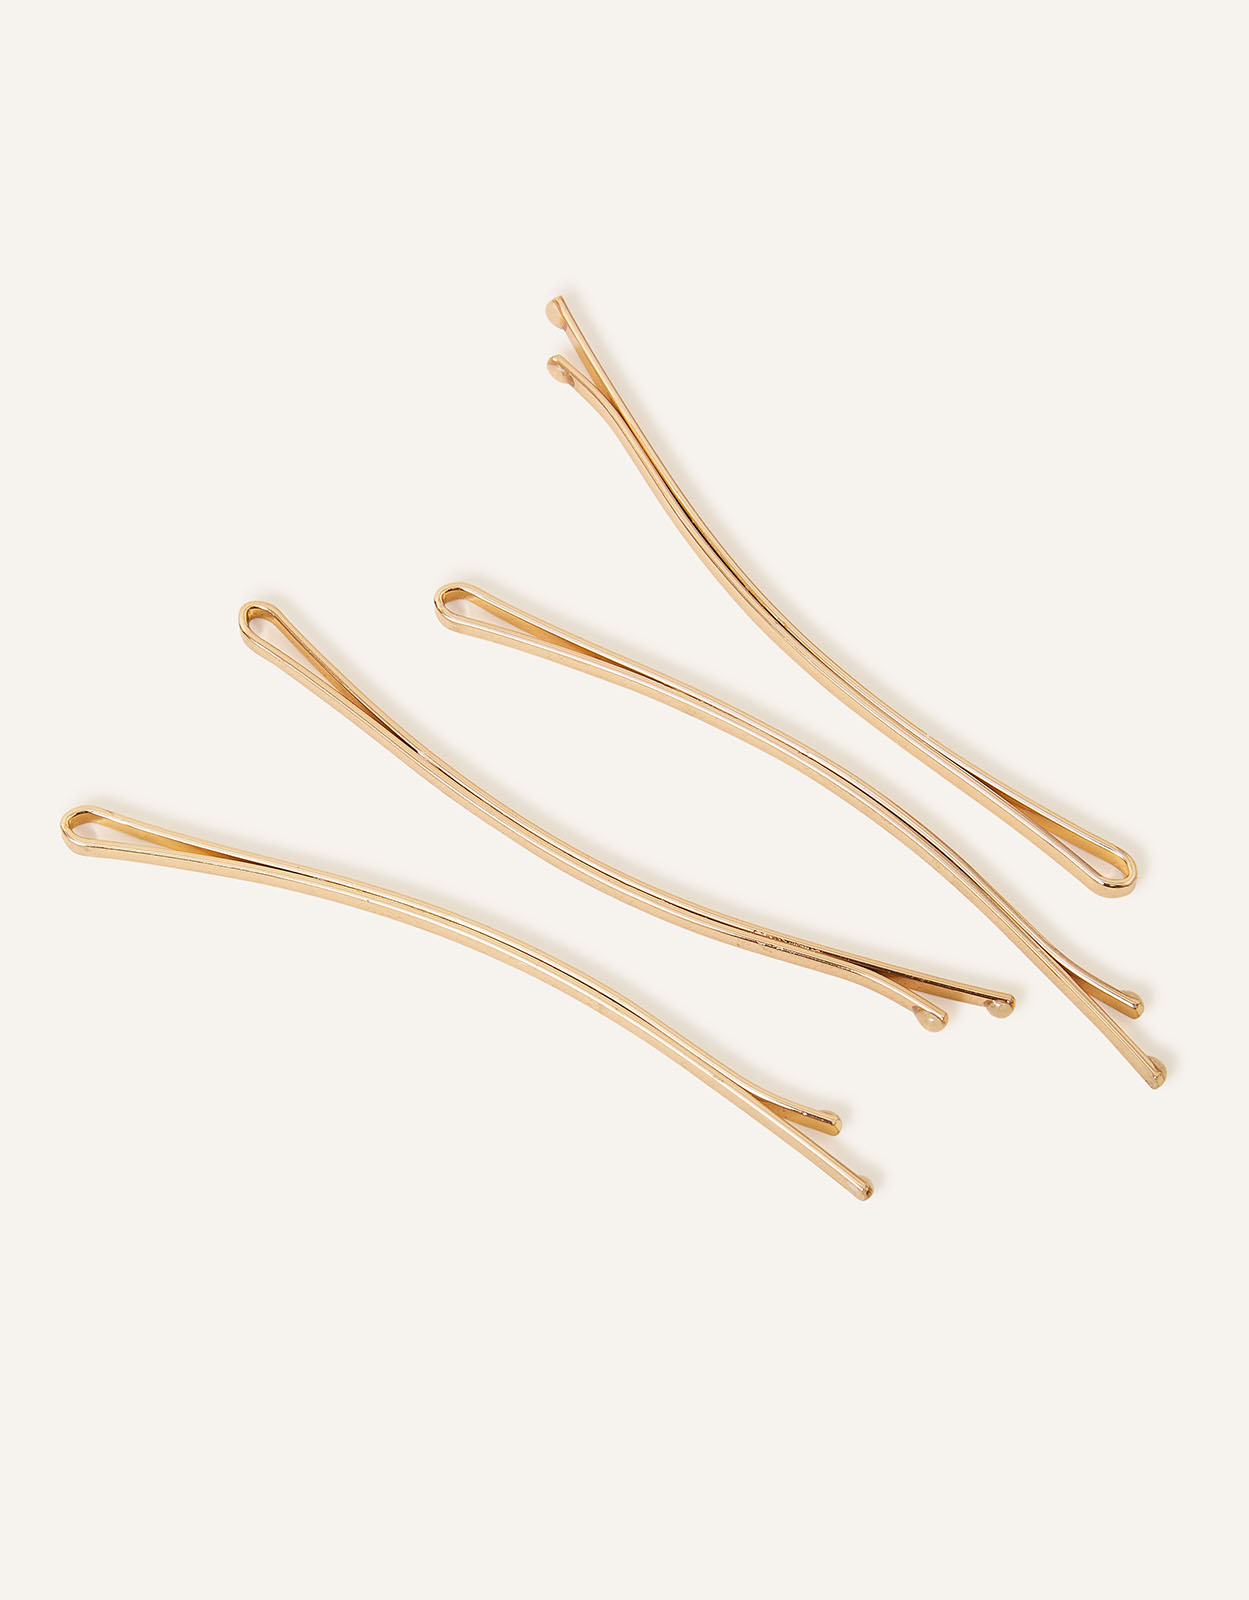 Accessorize Women's Long Curved Hair Slides 4 Pack Gold, Size: 9cm